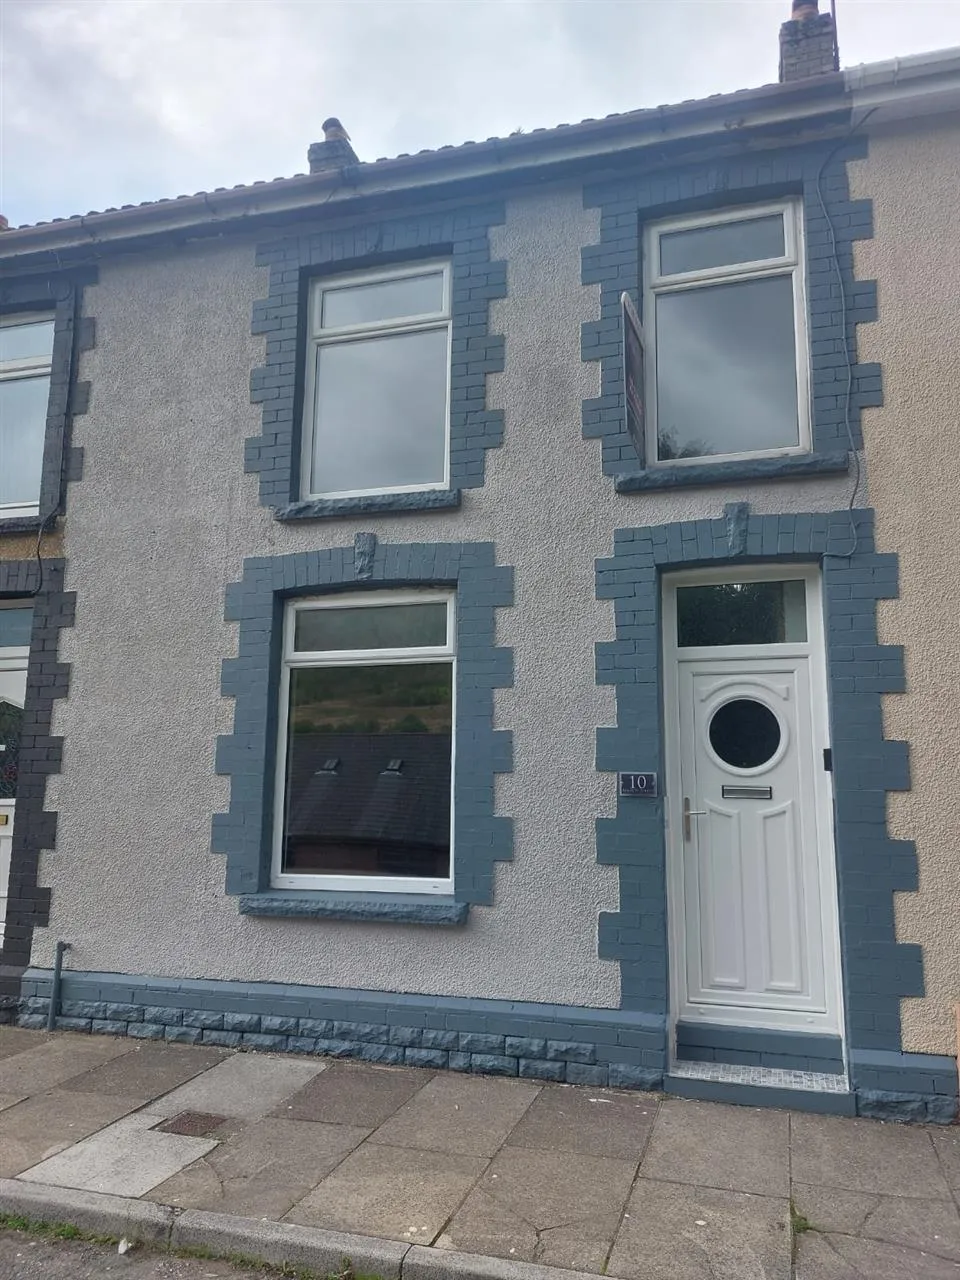 3 bed terraced house for sale -£129,995